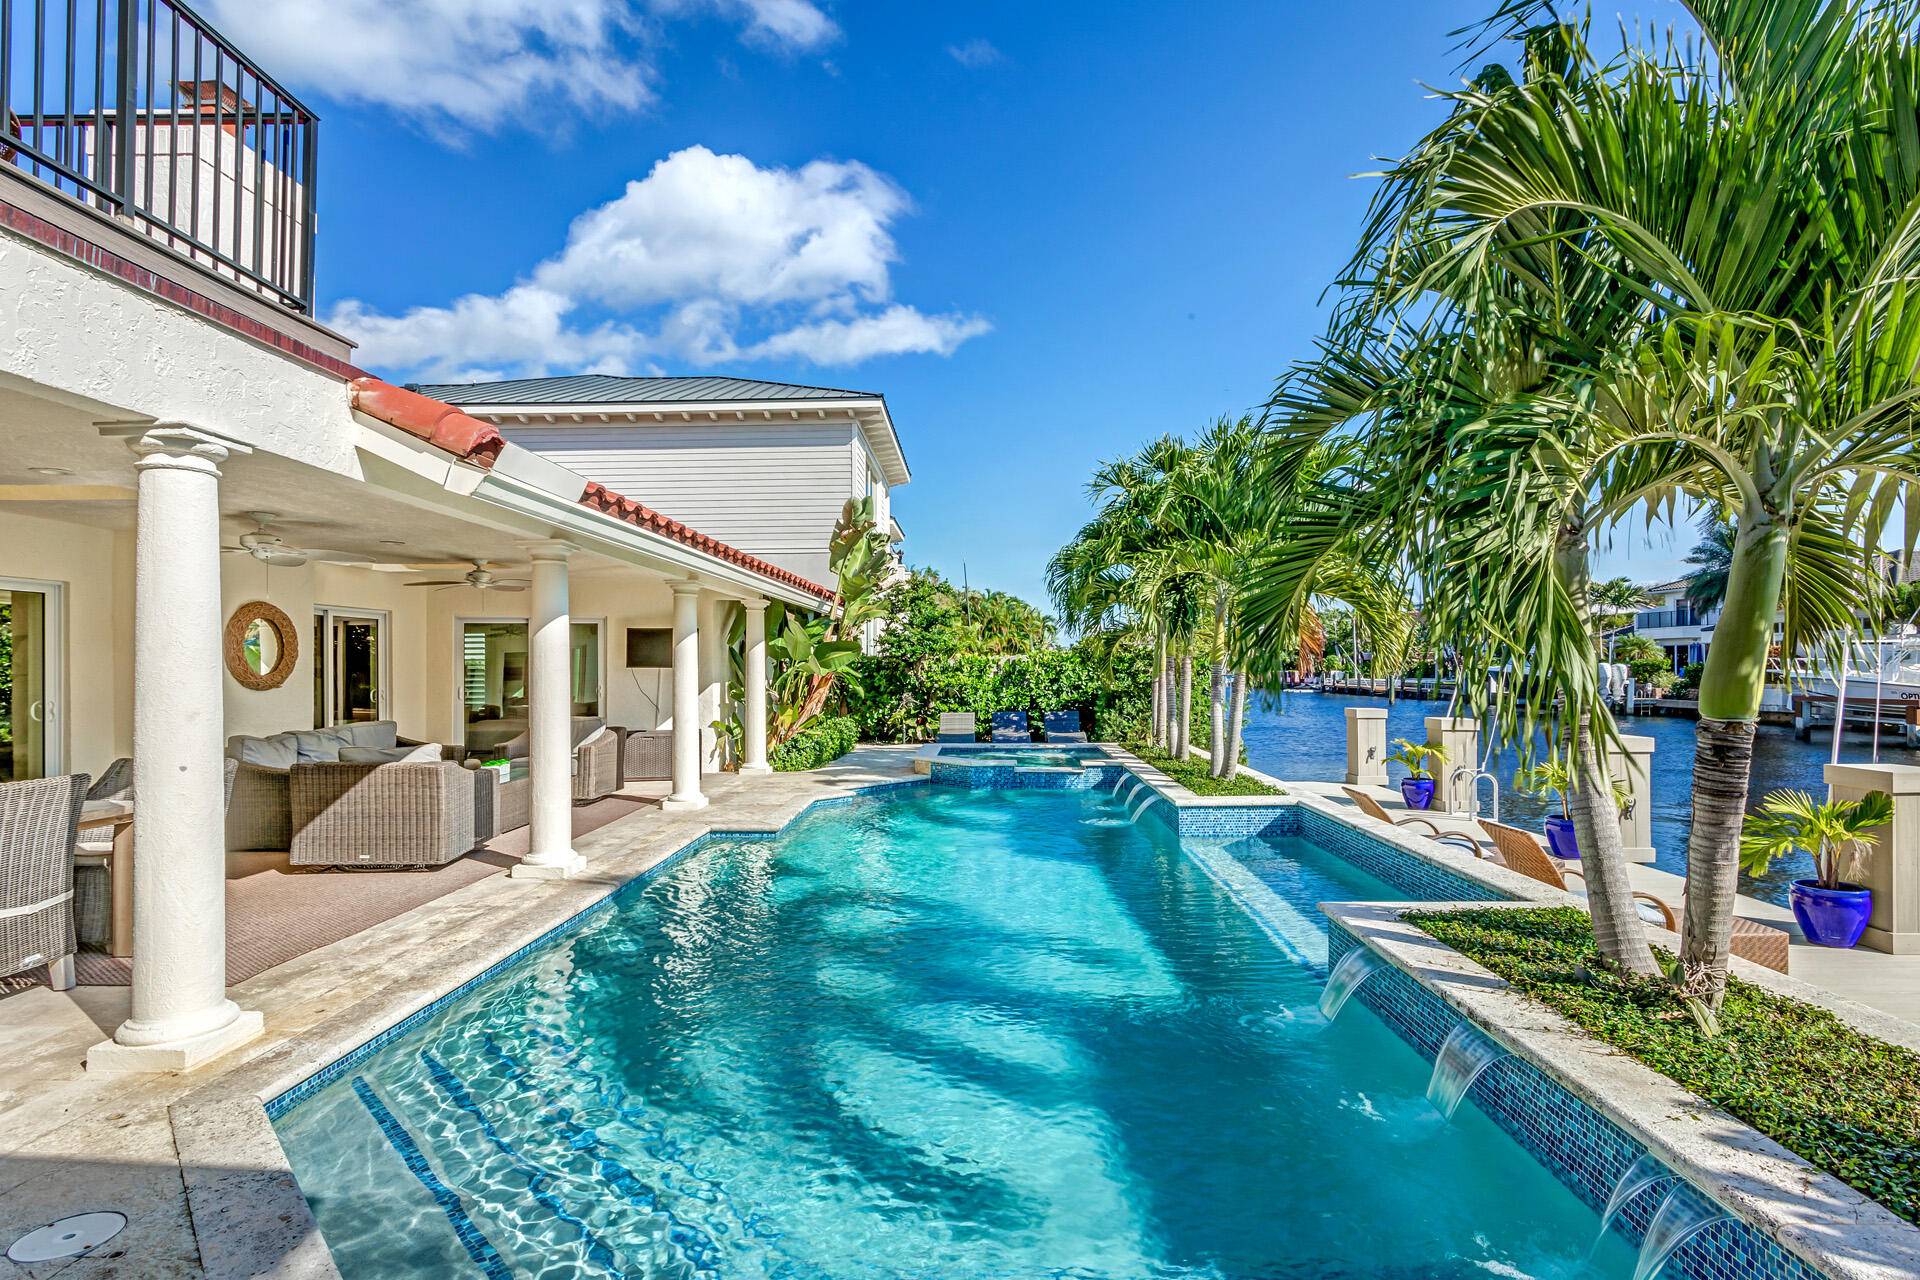 Incredible waterfront dream home in the coveted Tropic Isle neighborhood.